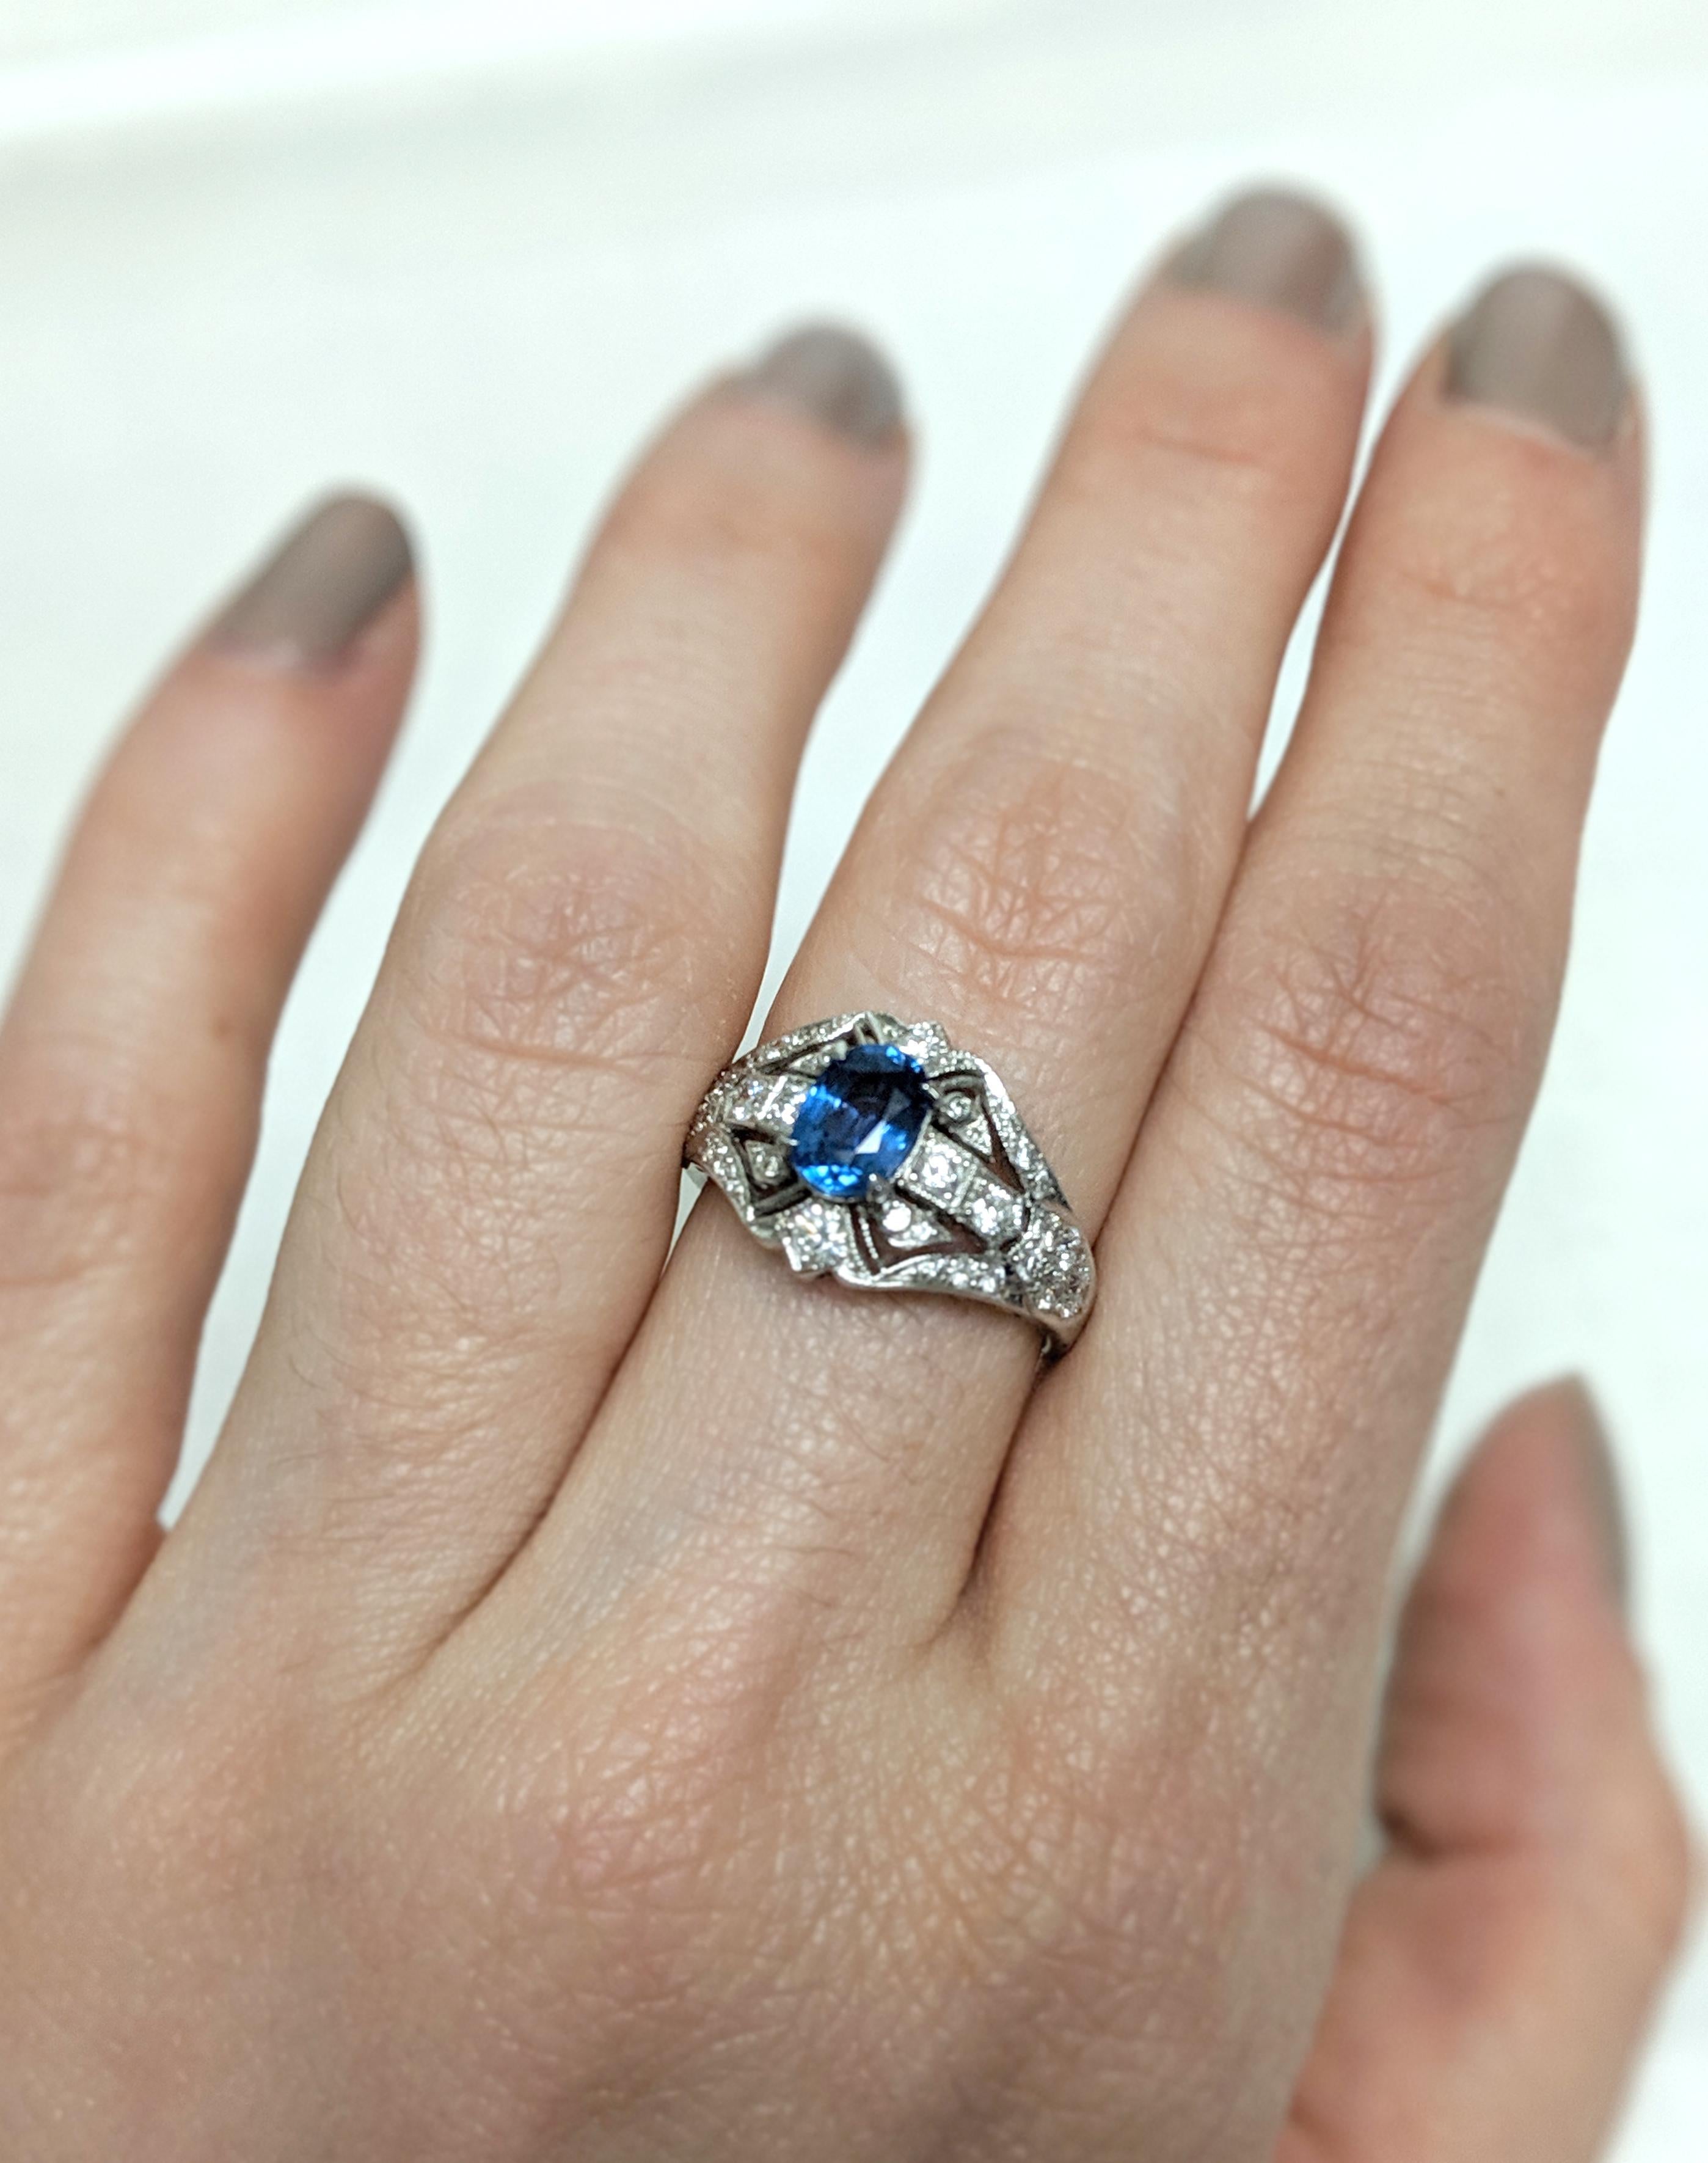 Oval Cut Estate 1.35 Carat Oval Blue Sapphire and Diamond Ring